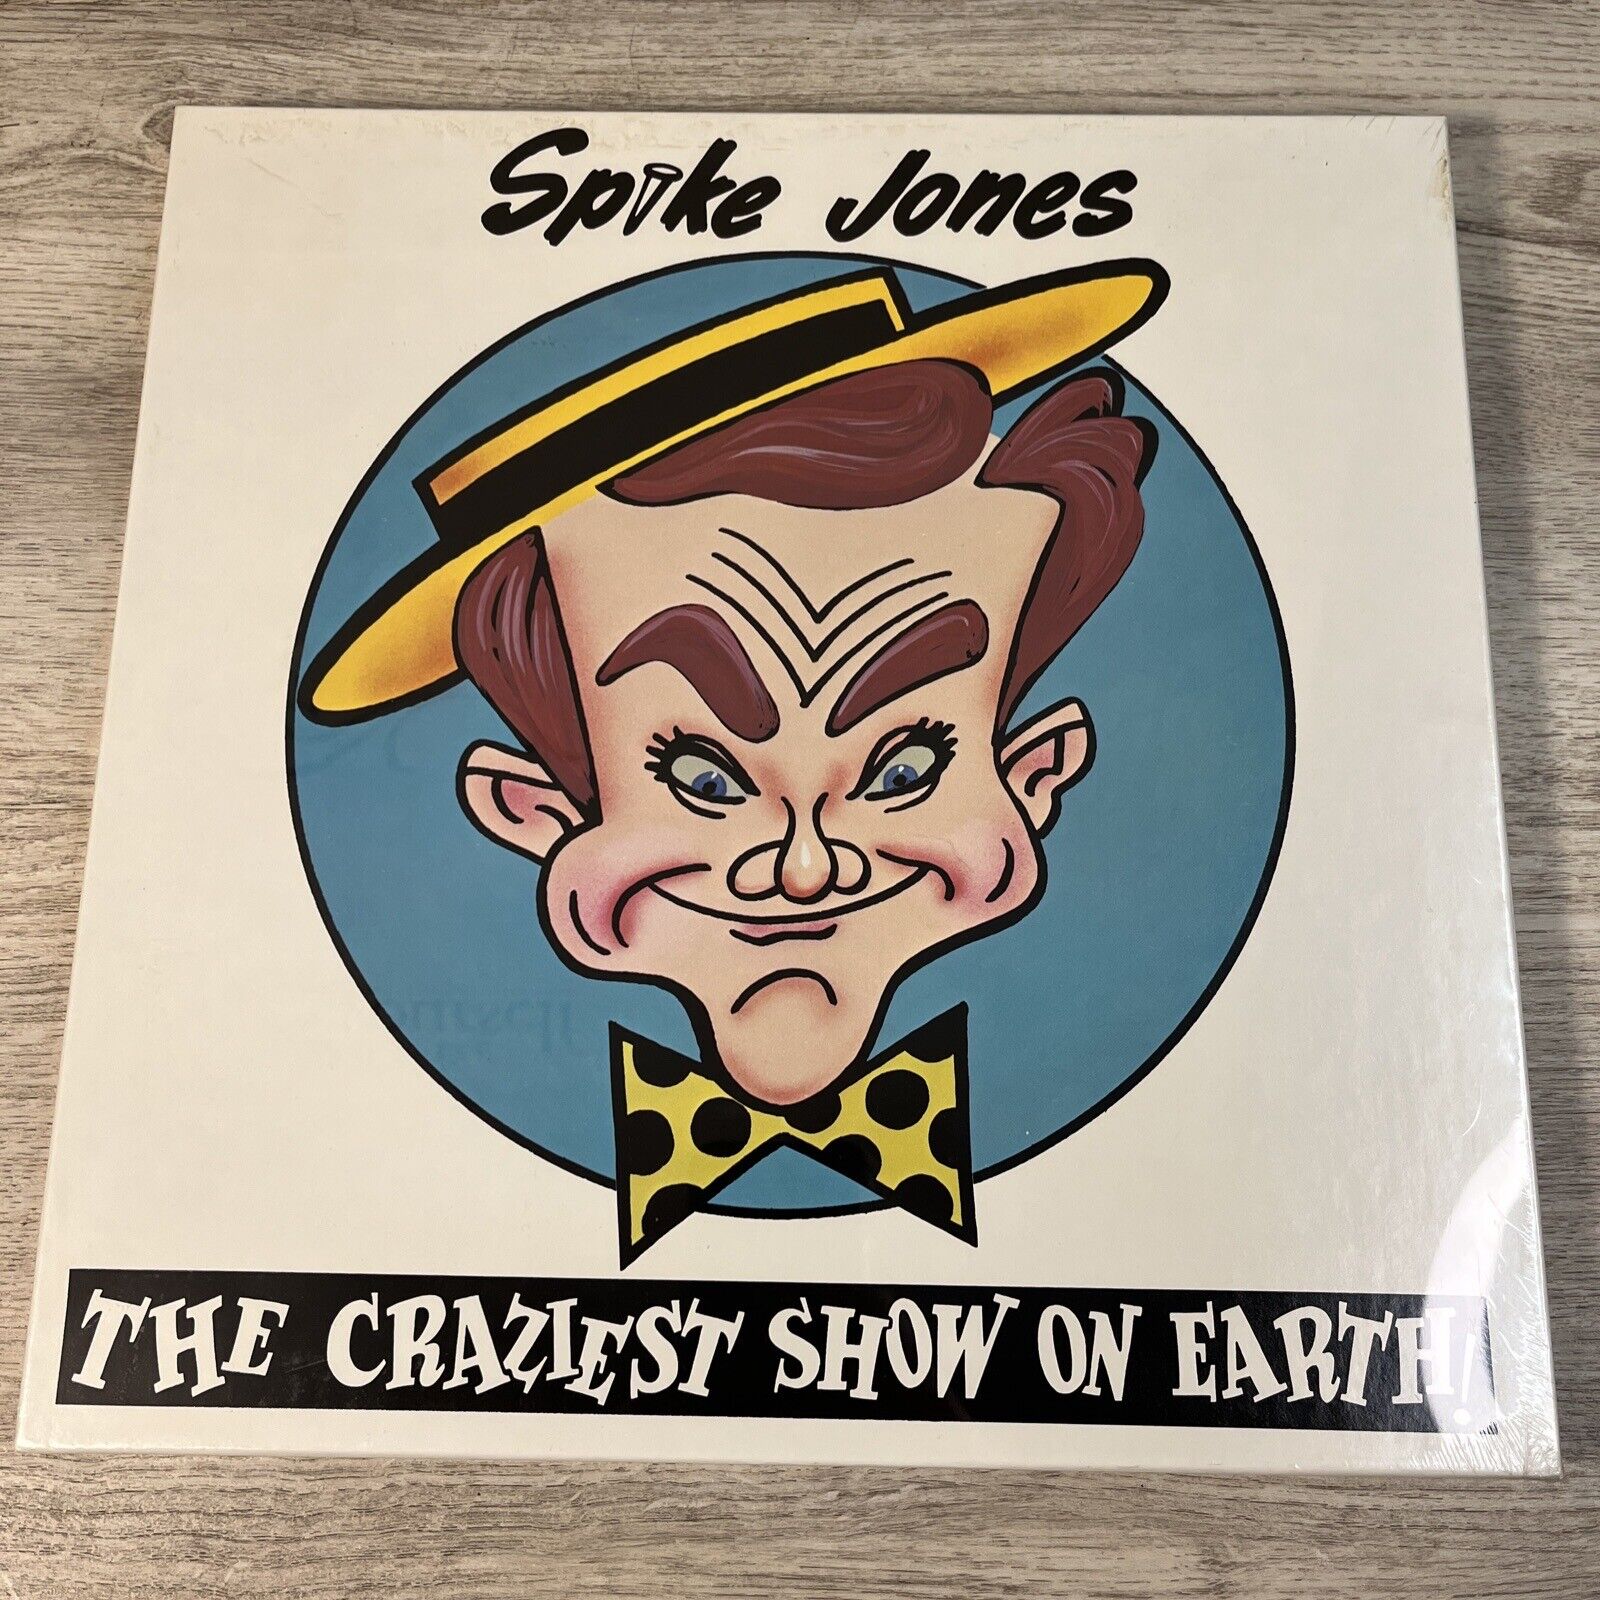 Spike Jones The Craziest Show On Earth! 3-LP Box Set 1977 G&O Records BRAND NEW!